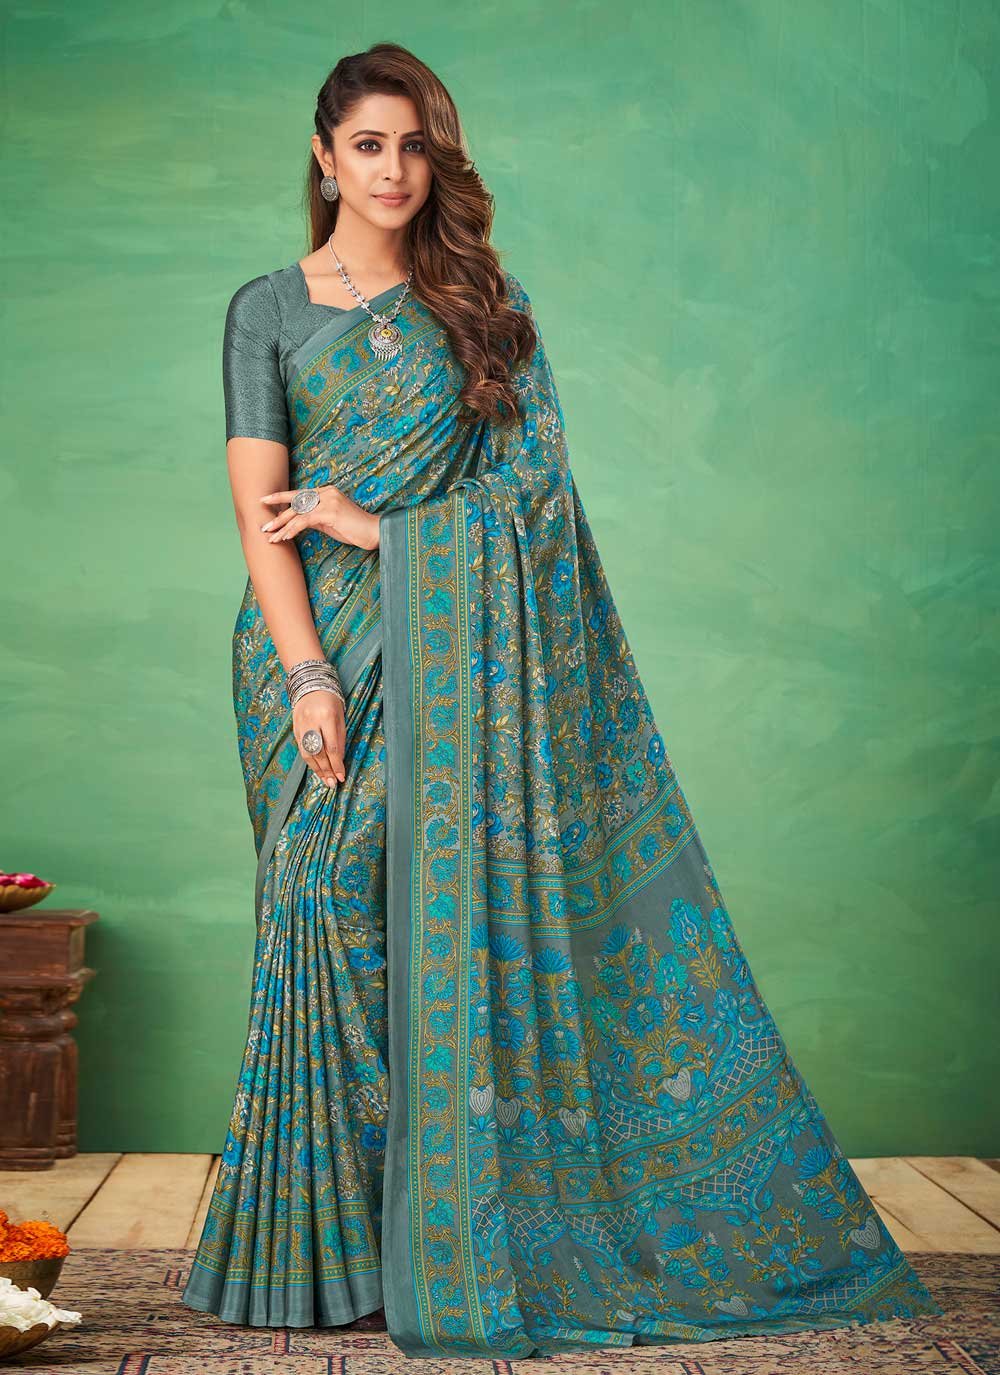 Pure Crepe Sarees Latest Price from Manufacturers, Suppliers & Traders